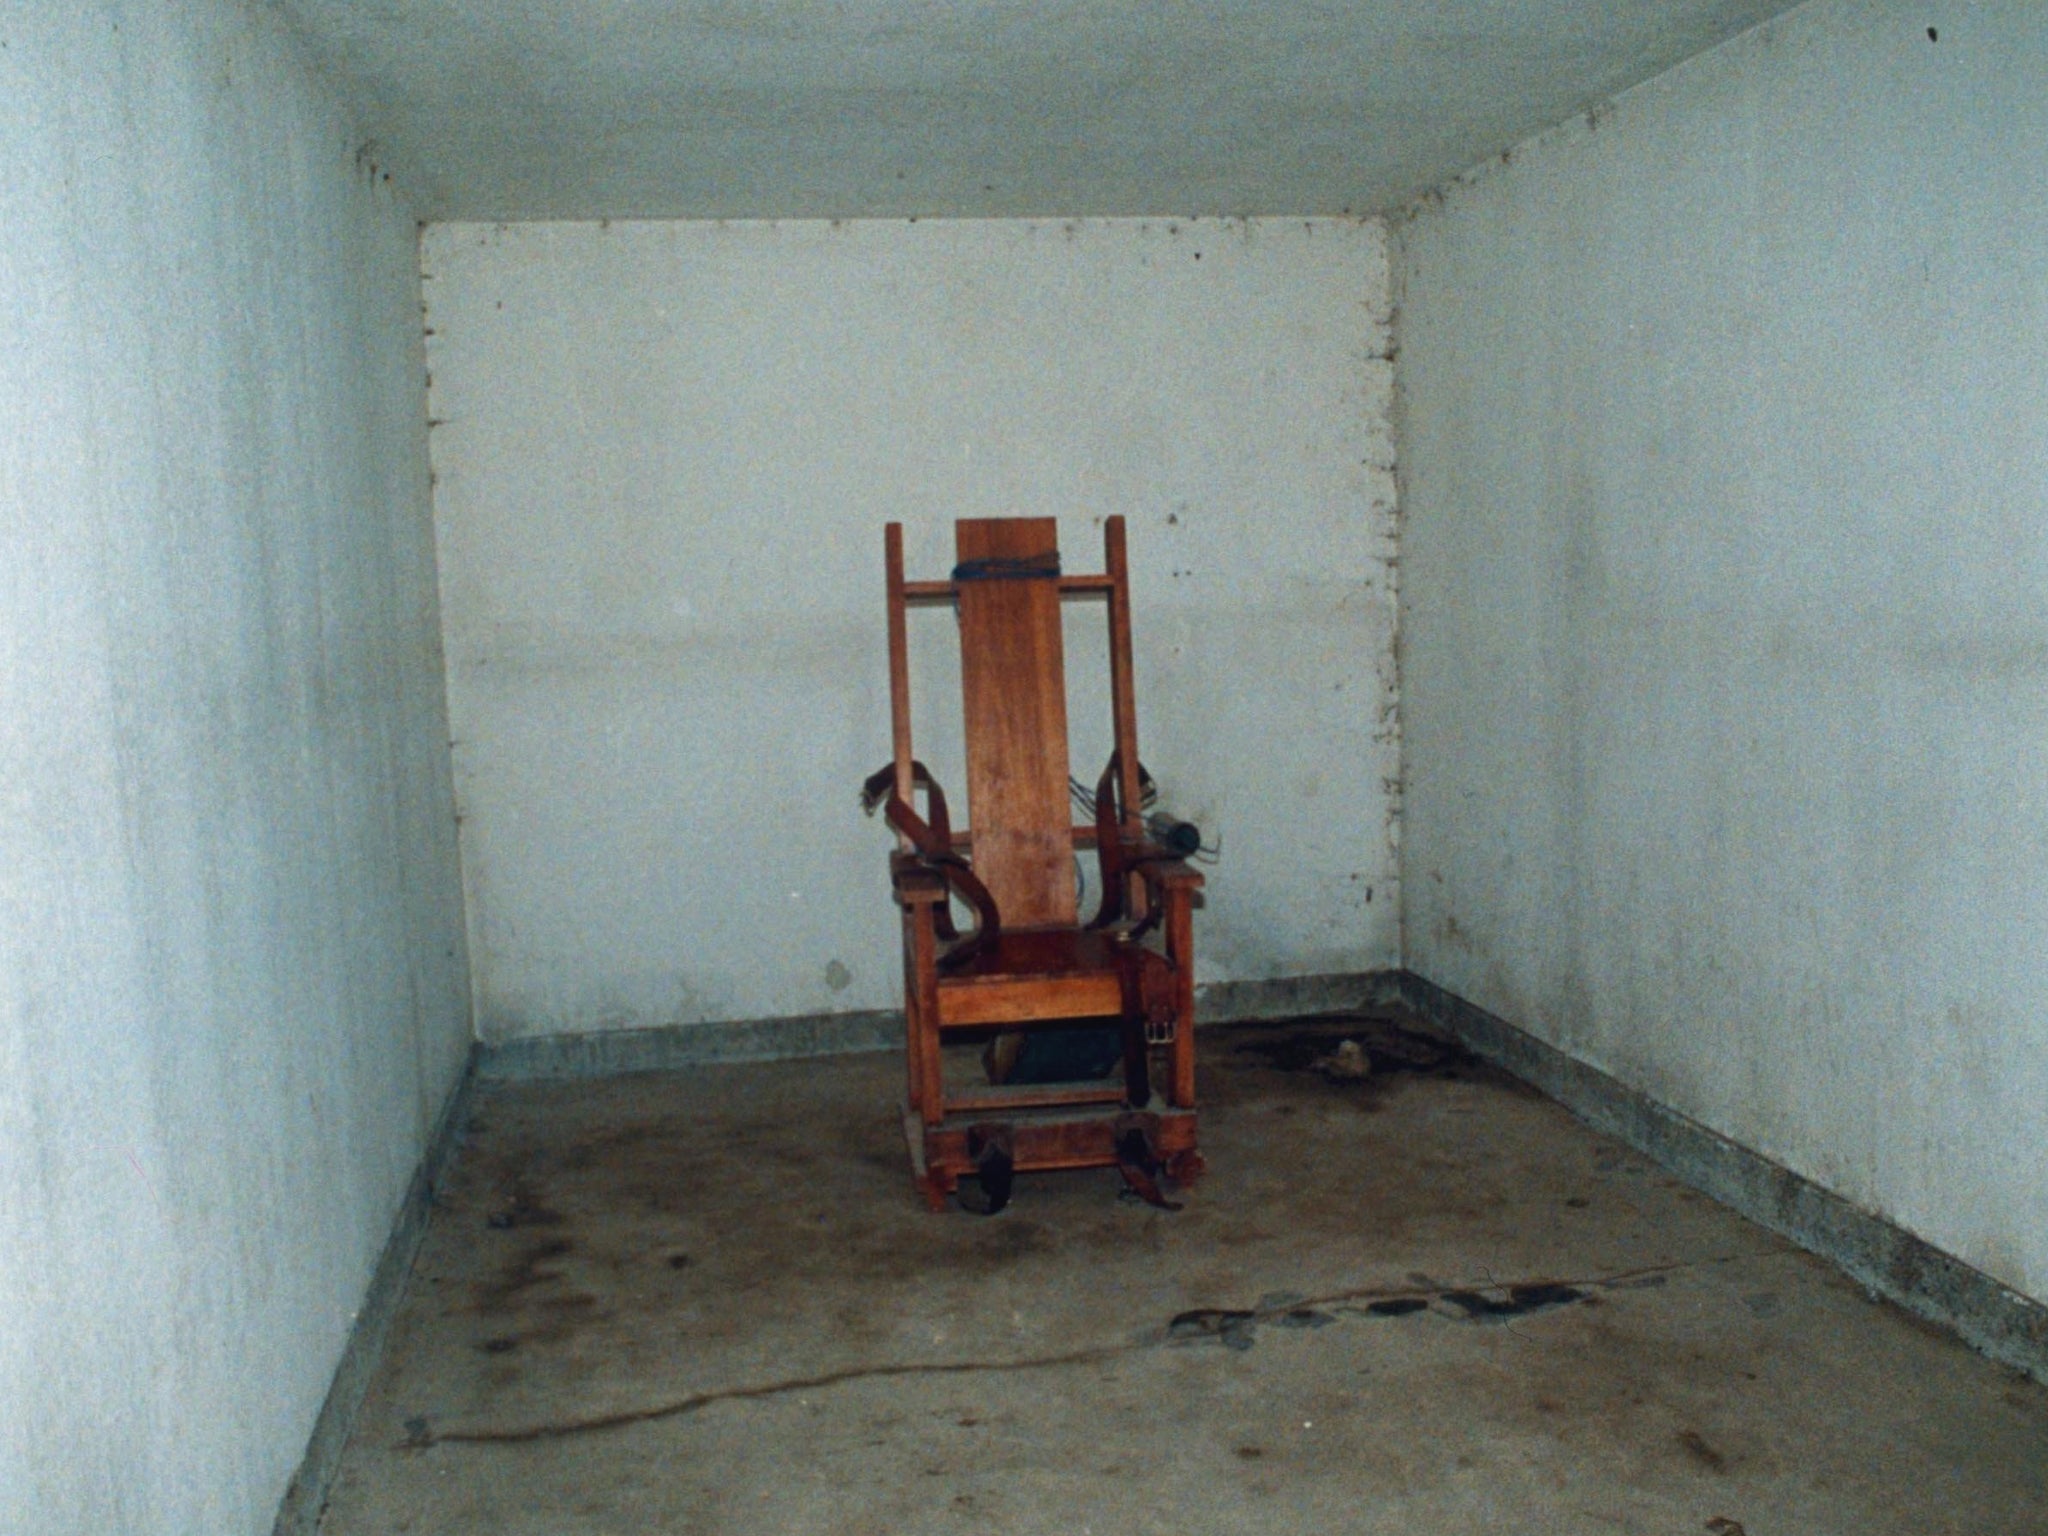 Missouri is one of four states with the gas chamber as an alternative for executions.